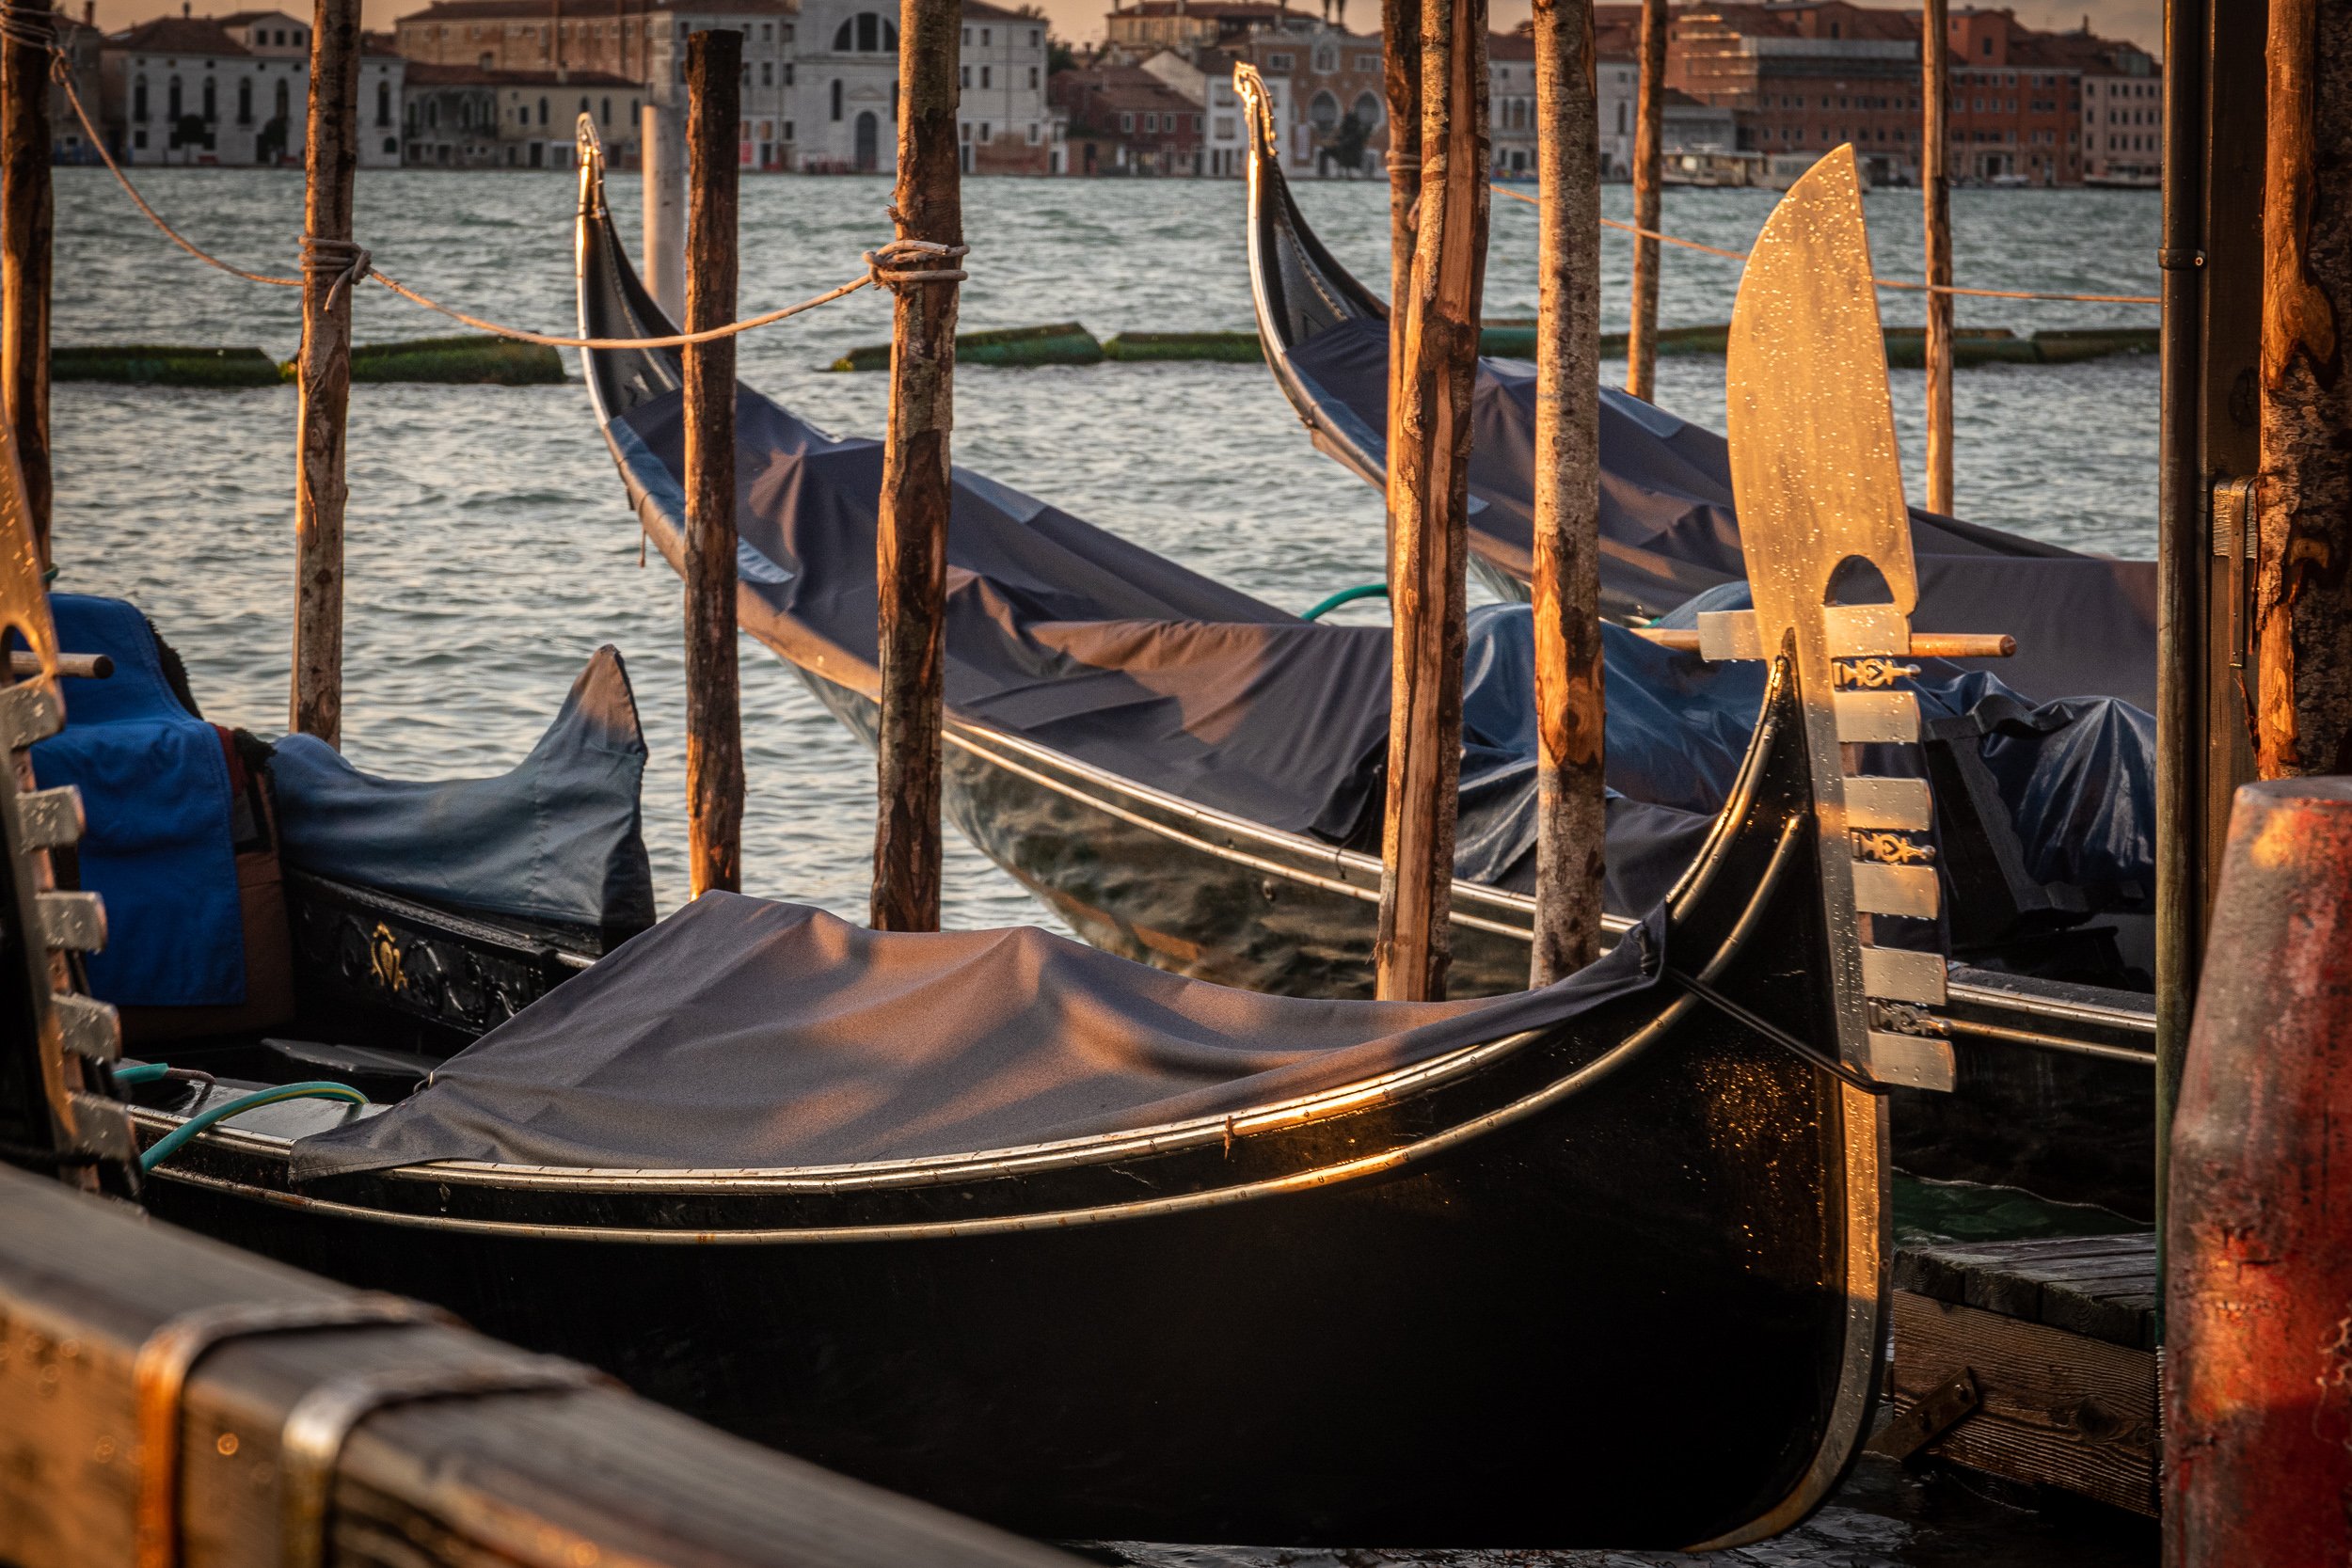 how much is a gondola ride in Venice - Gondolas Are Everywhere